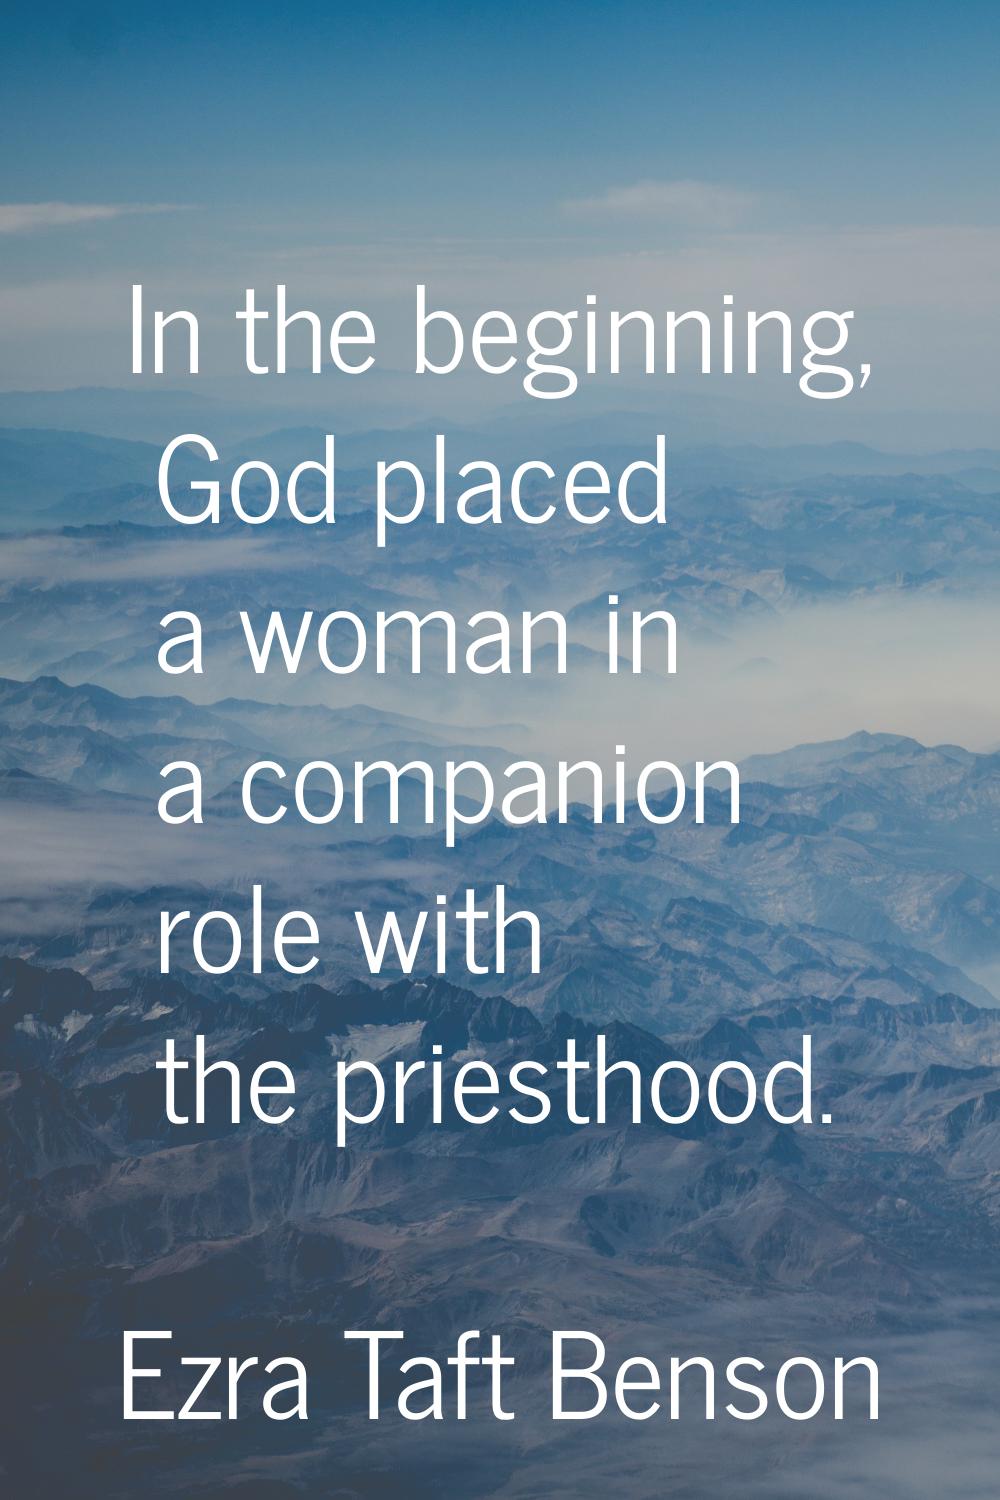 In the beginning, God placed a woman in a companion role with the priesthood.